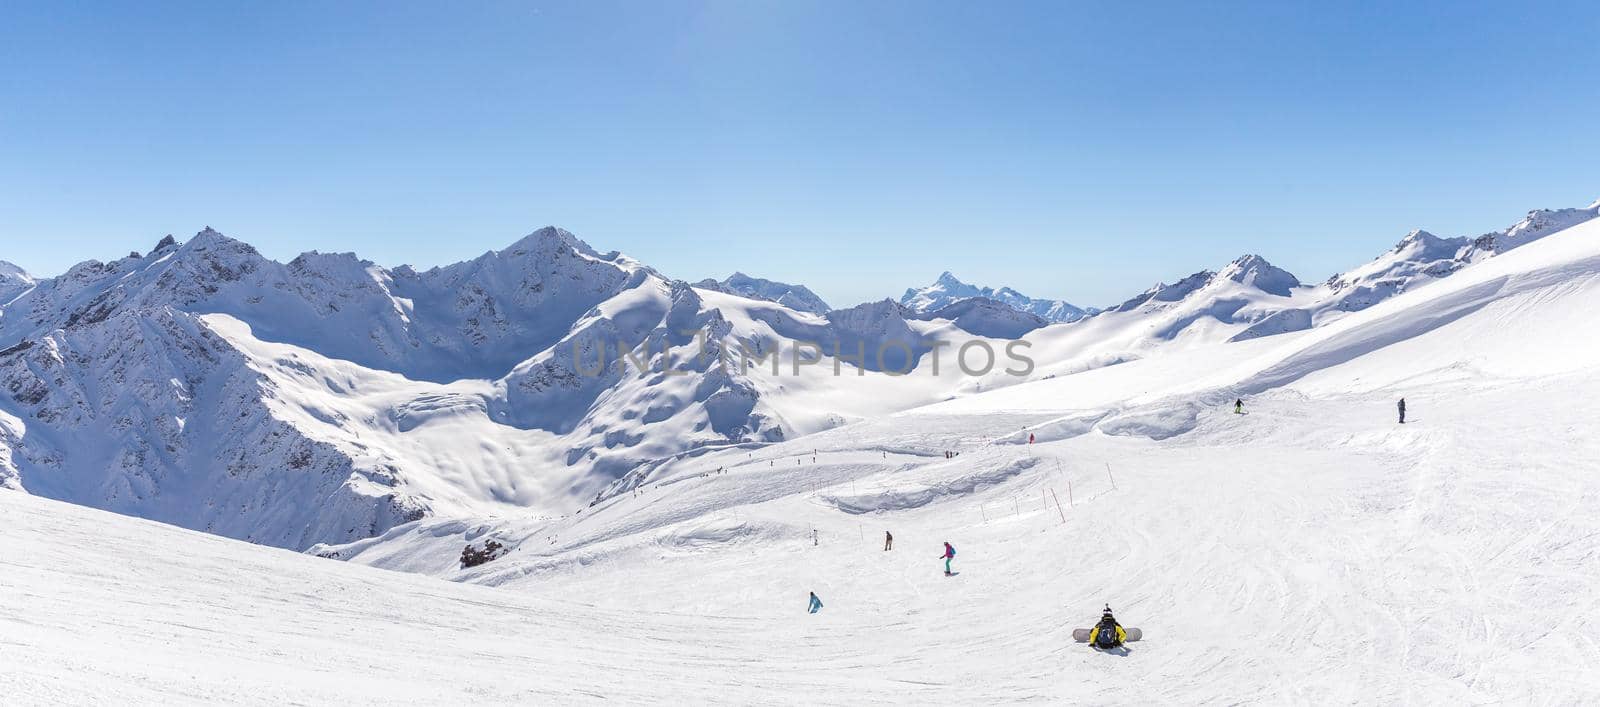 White snowy winter Caucasus mountains at sunny day. Panorama view from ski slope Elbrus, Russia with sky background